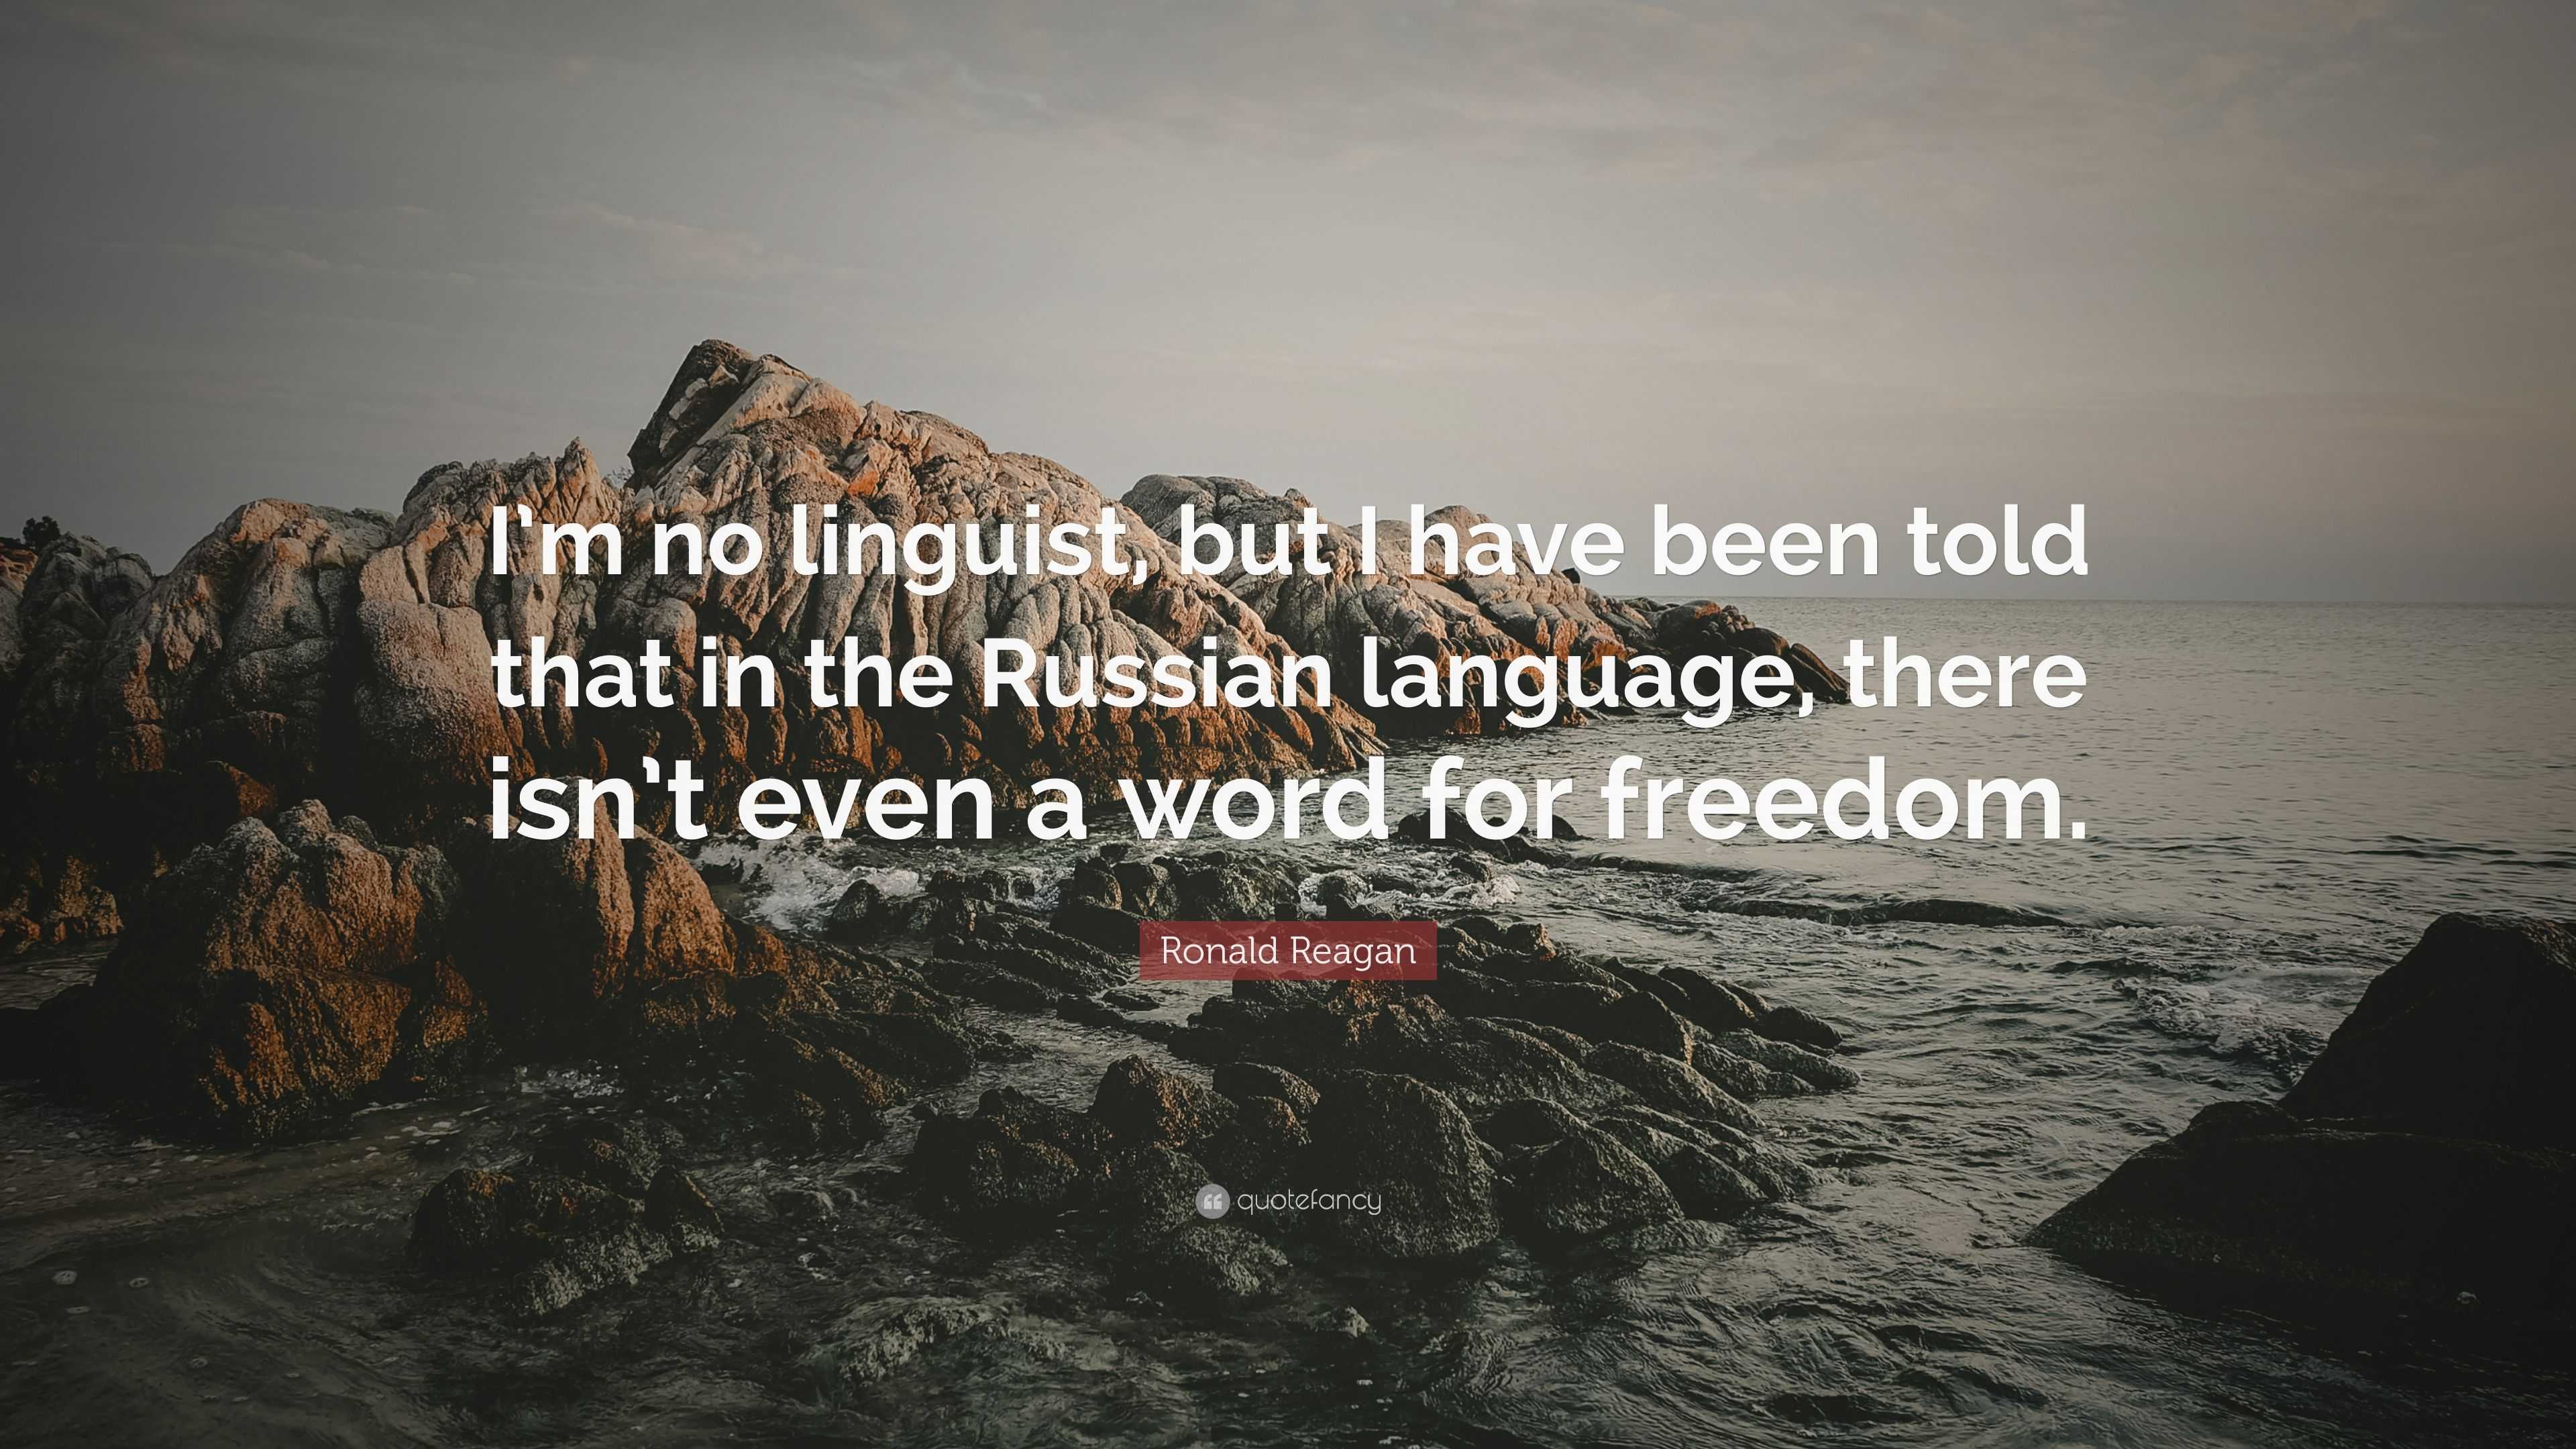 looking for russian linguist